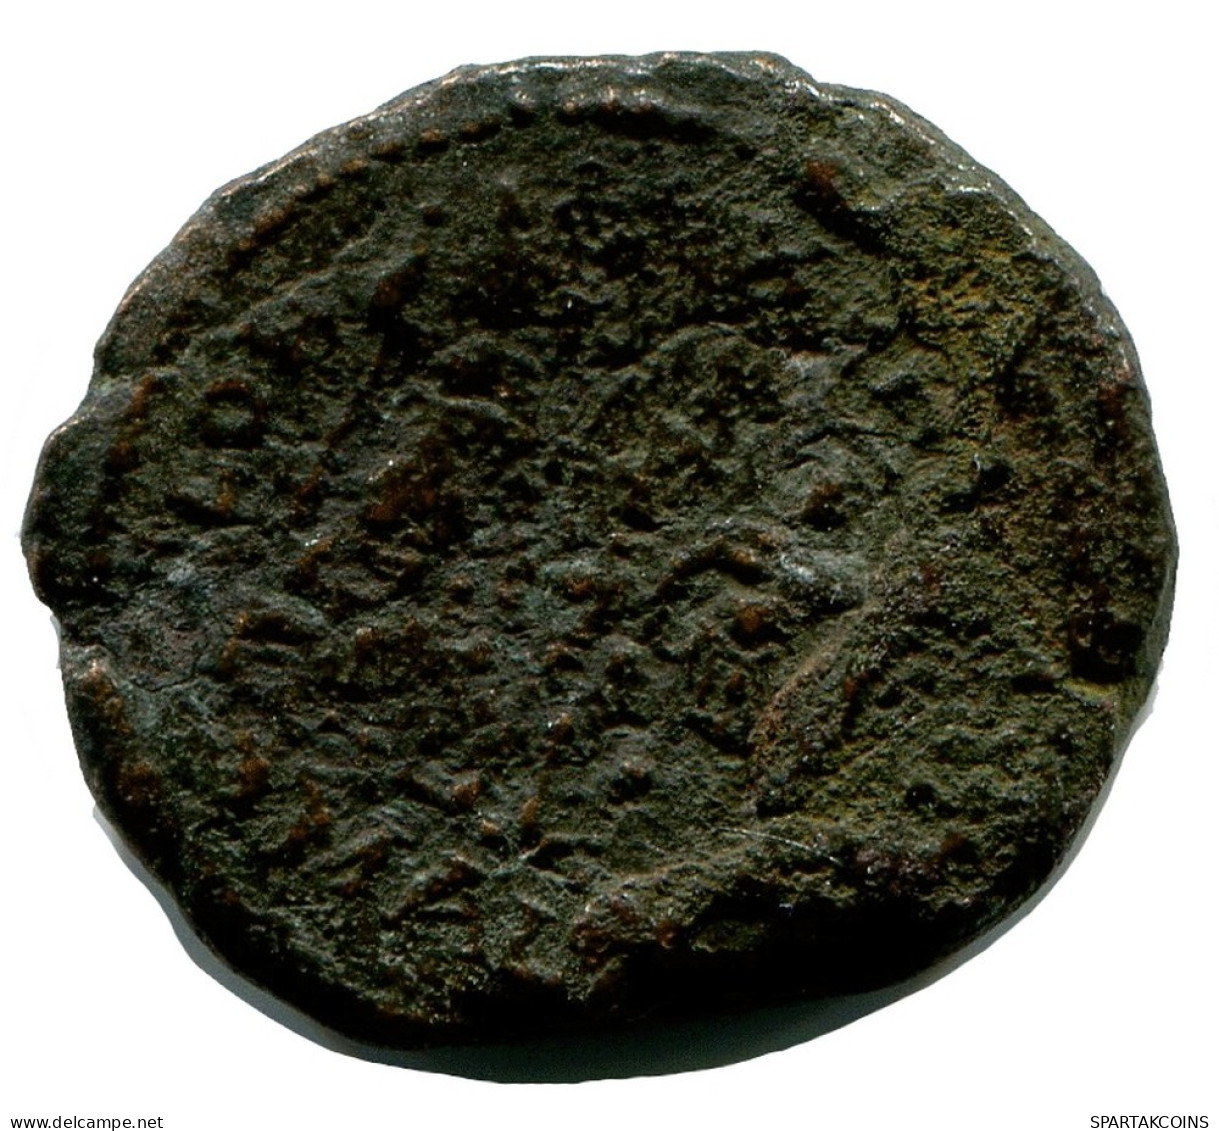 ROMAN Coin MINTED IN ALEKSANDRIA FOUND IN IHNASYAH HOARD EGYPT #ANC10176.14.U.A - The Christian Empire (307 AD Tot 363 AD)